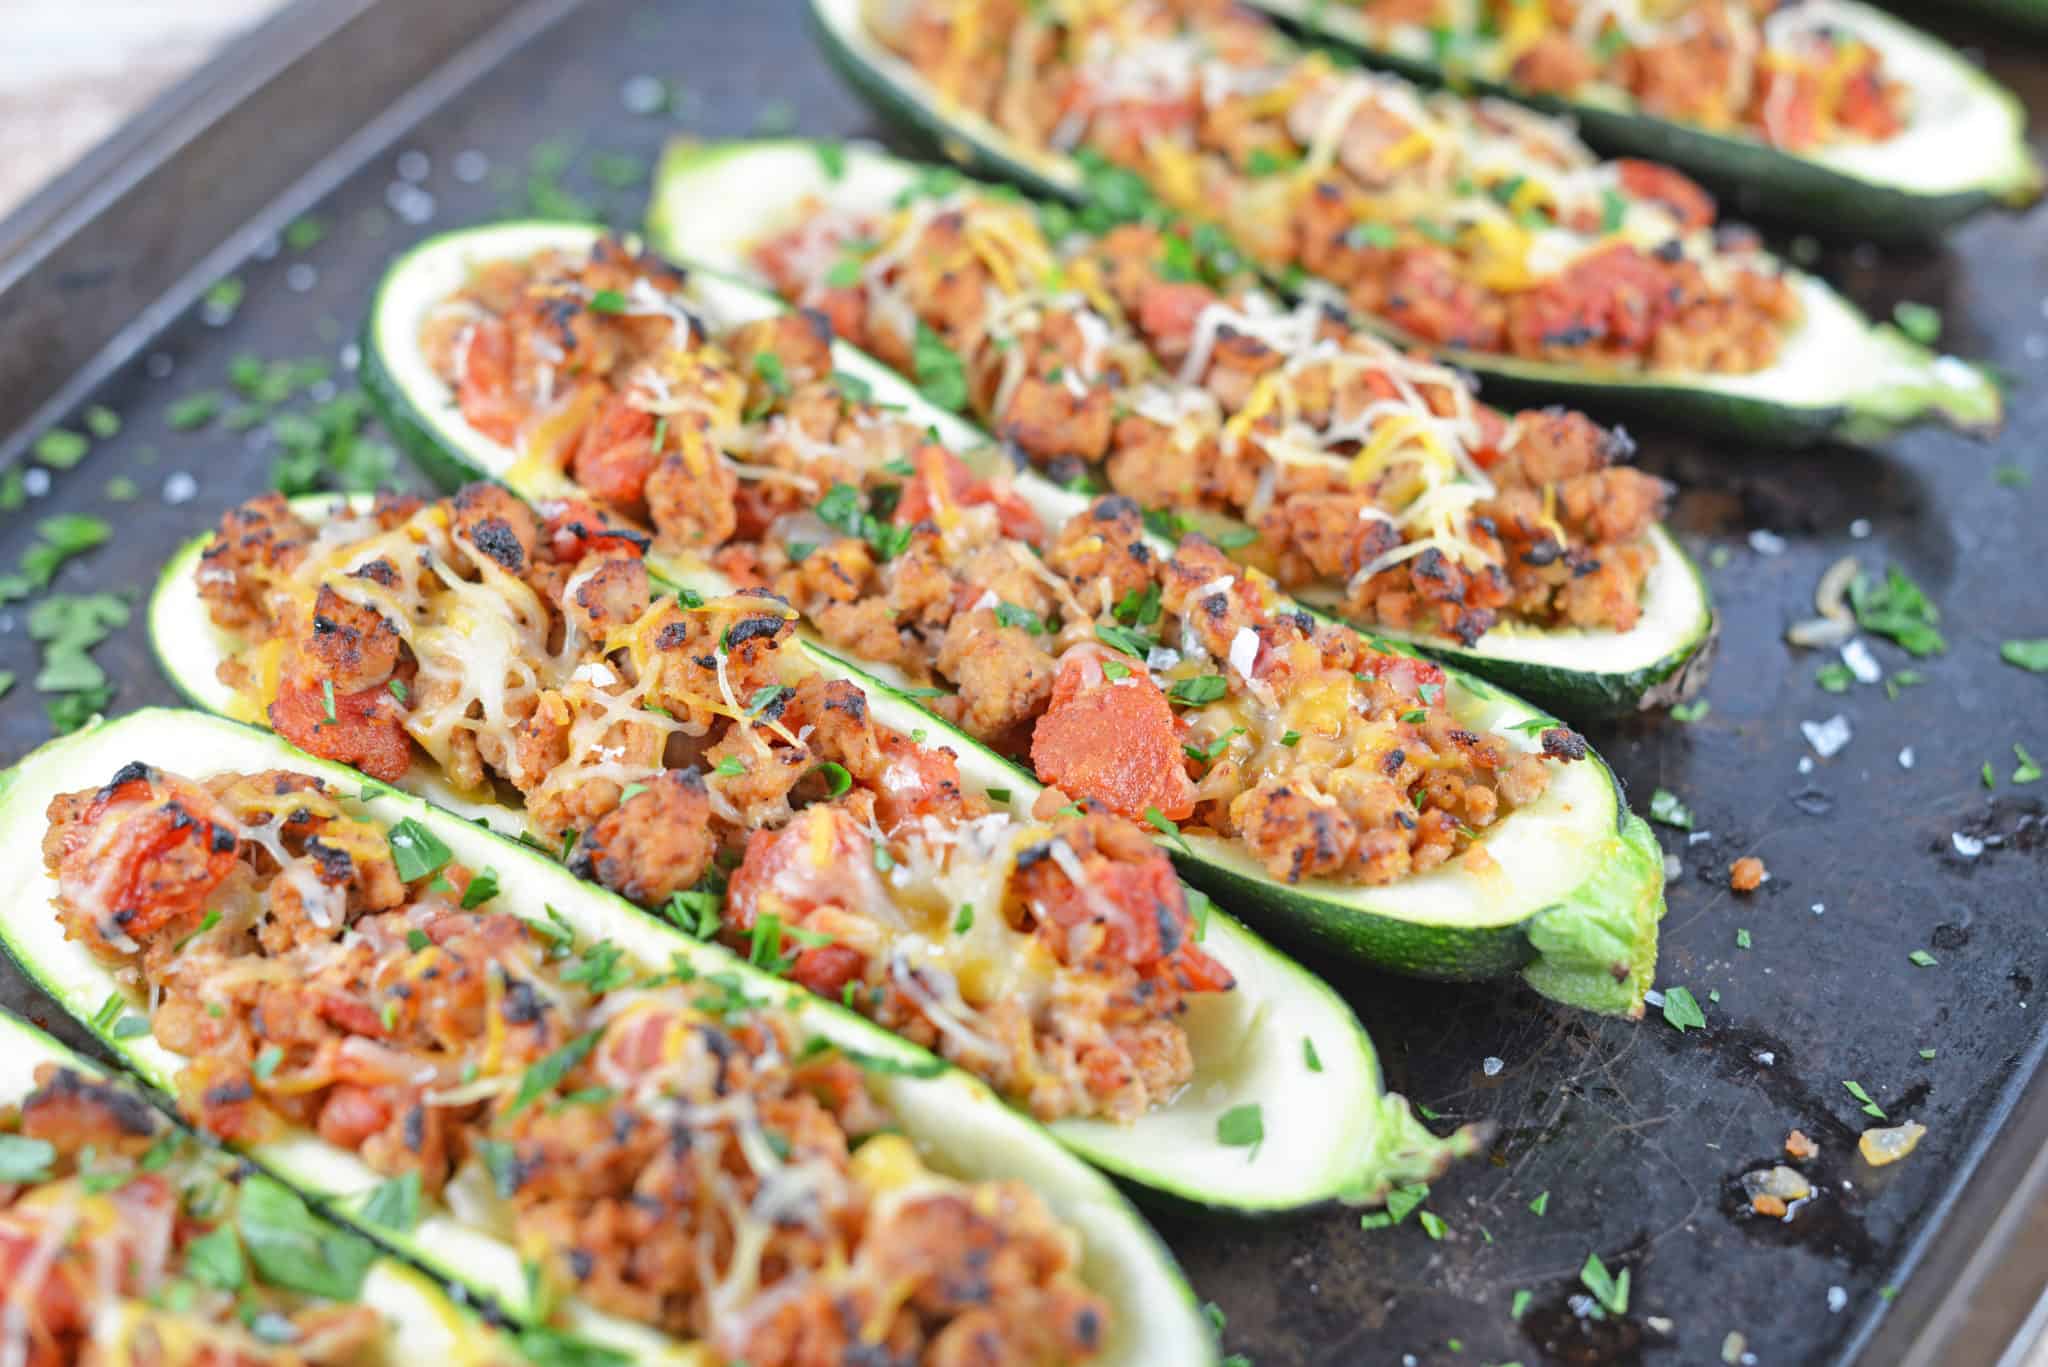 Grilled Turkey Zucchini Boats Recipe - Looking for grilling recipes? Turkey stuffed zucchini makes the perfect healthy dinner! One of the best zucchini recipes I’ve ever made. www.savoryexperiments.com